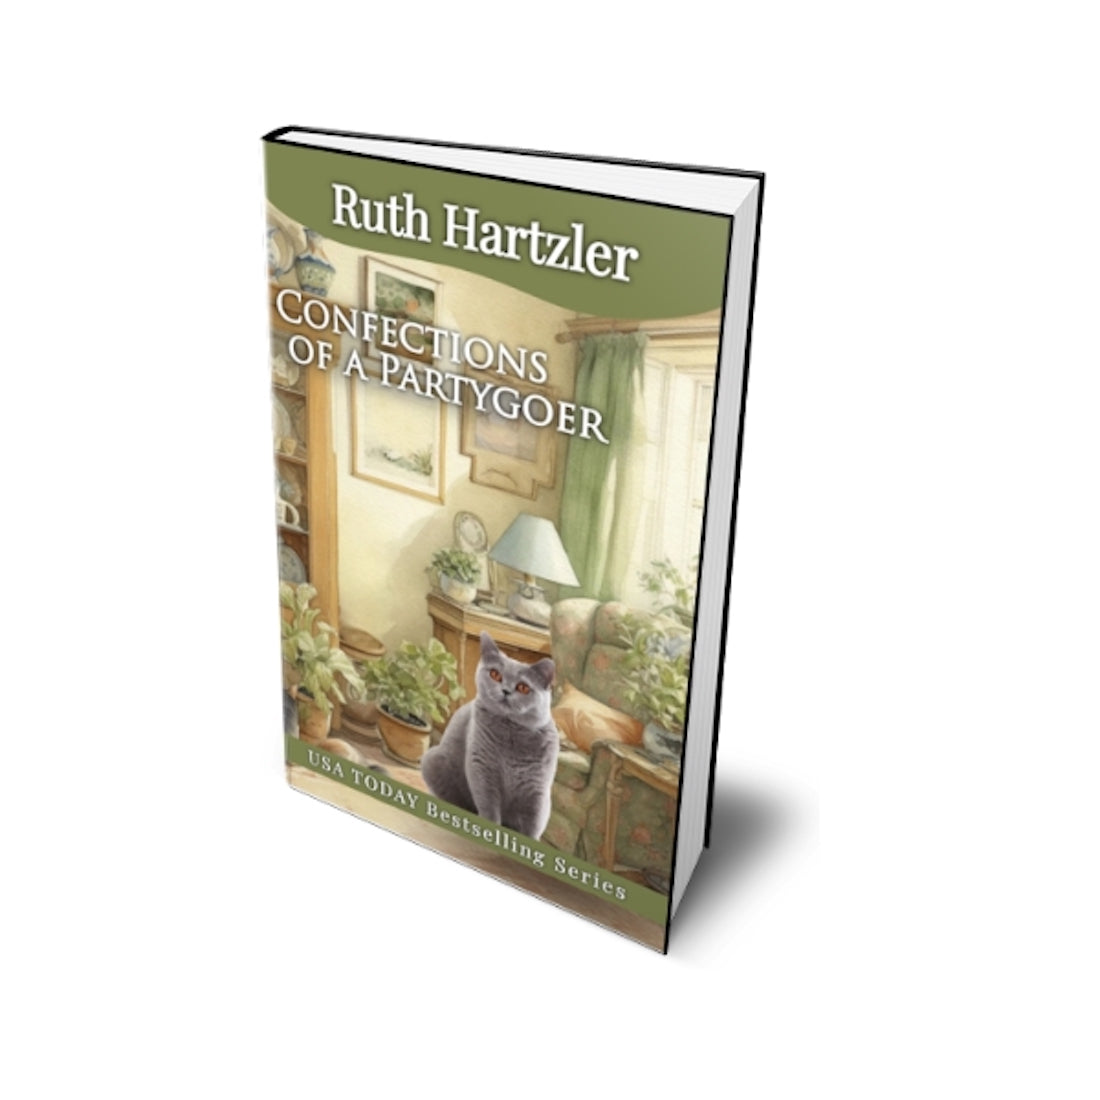 Confections of a Partygoer PAPERBACK cozy mystery ruth hartzler